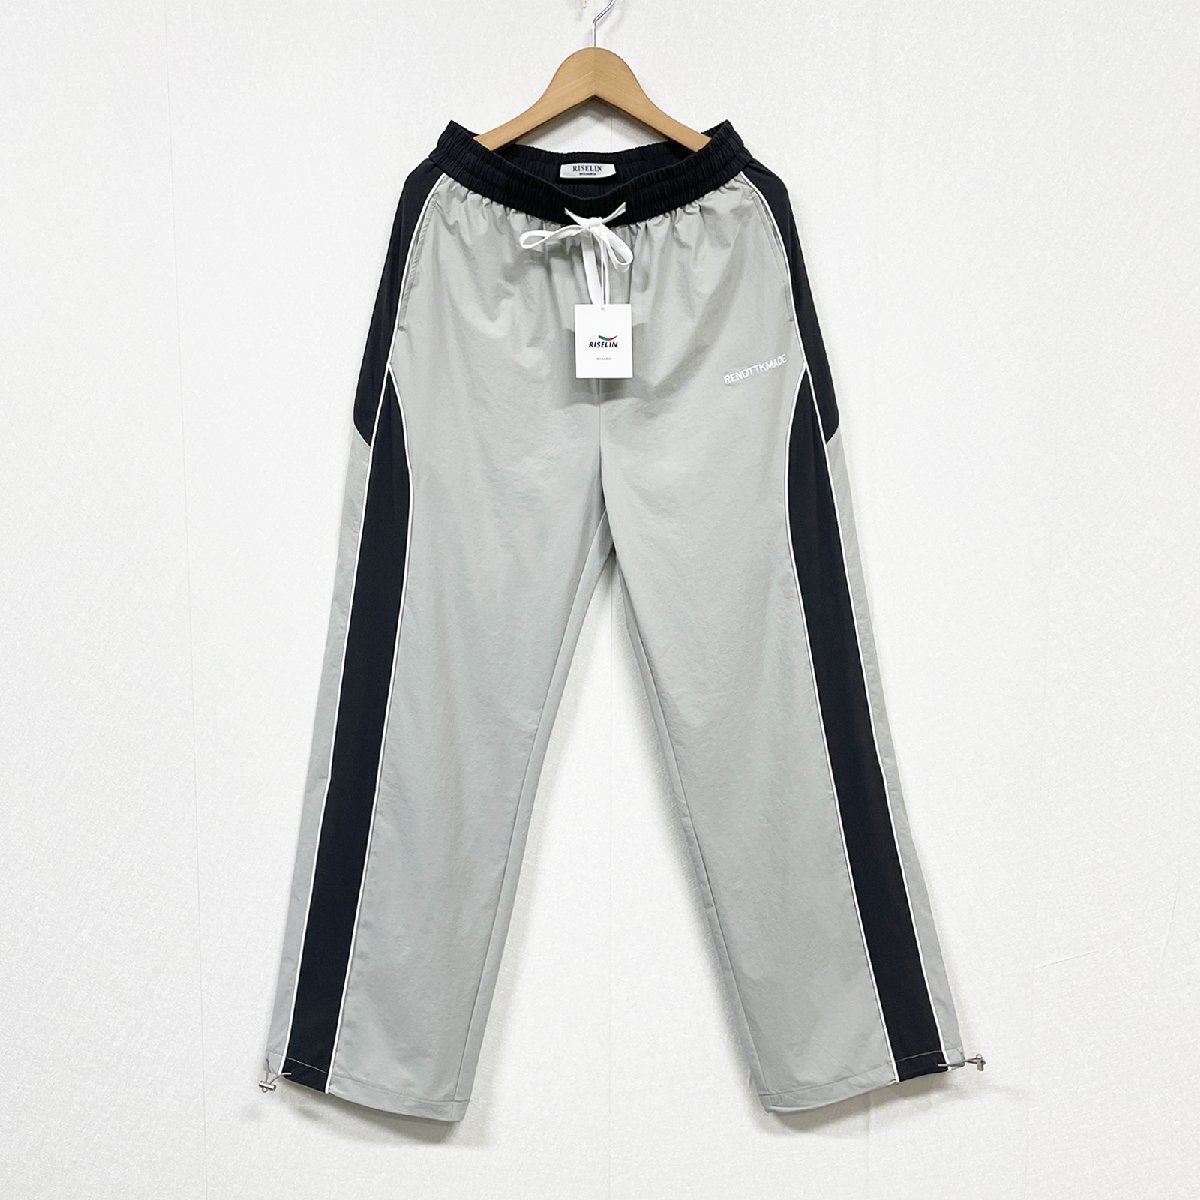  new work Europe made * regular price 5 ten thousand * BVLGARY a departure *RISELIN sweat pants thin comfortable easy ... switch bottoms chinos sport 2XL/52